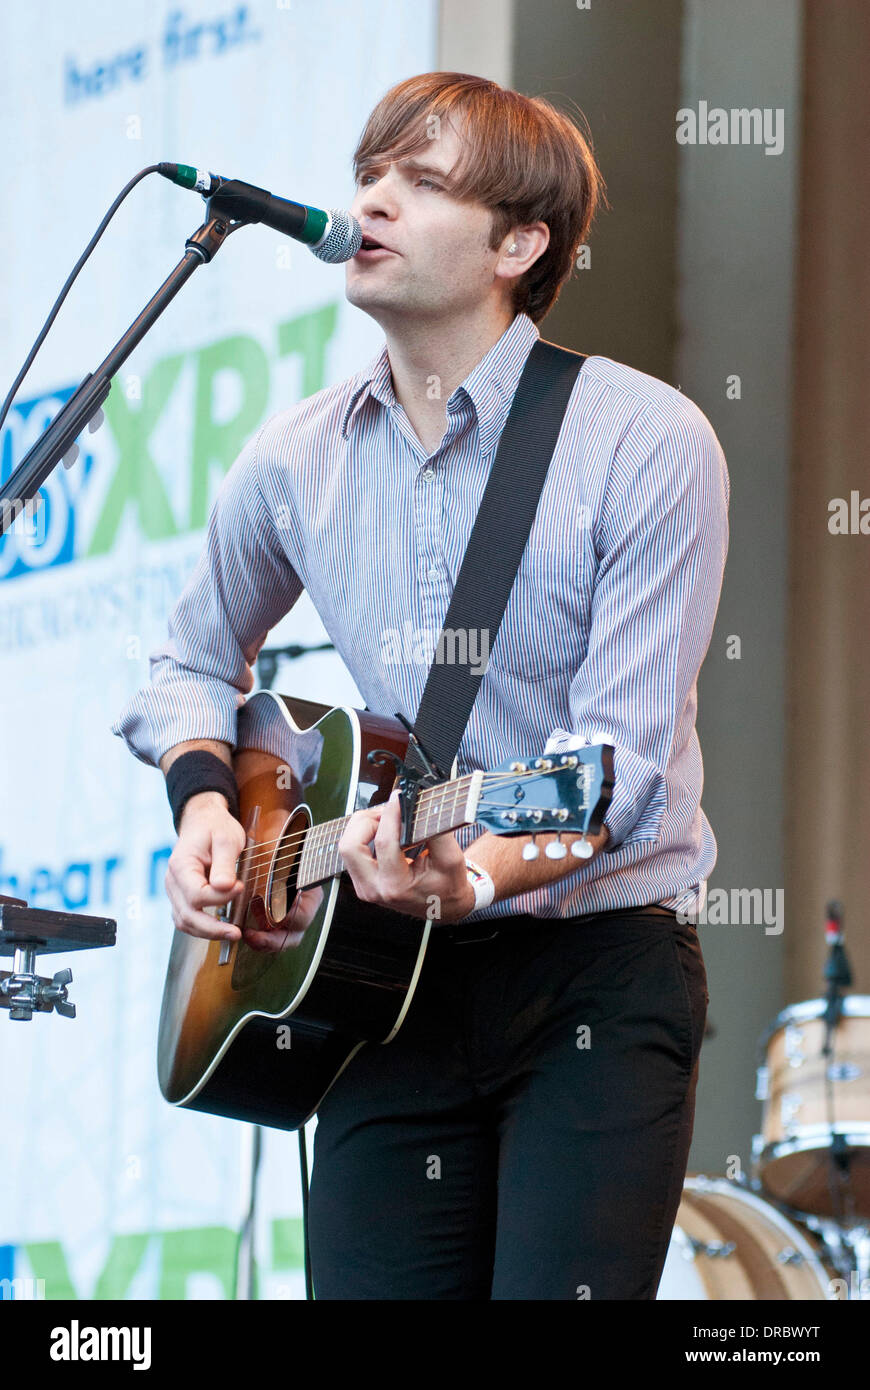 Ben Gibbard of Death Cab for Cutie  performing live at Taste of Chicago 2012  Chicago, Illinois - 12.07.12 Stock Photo